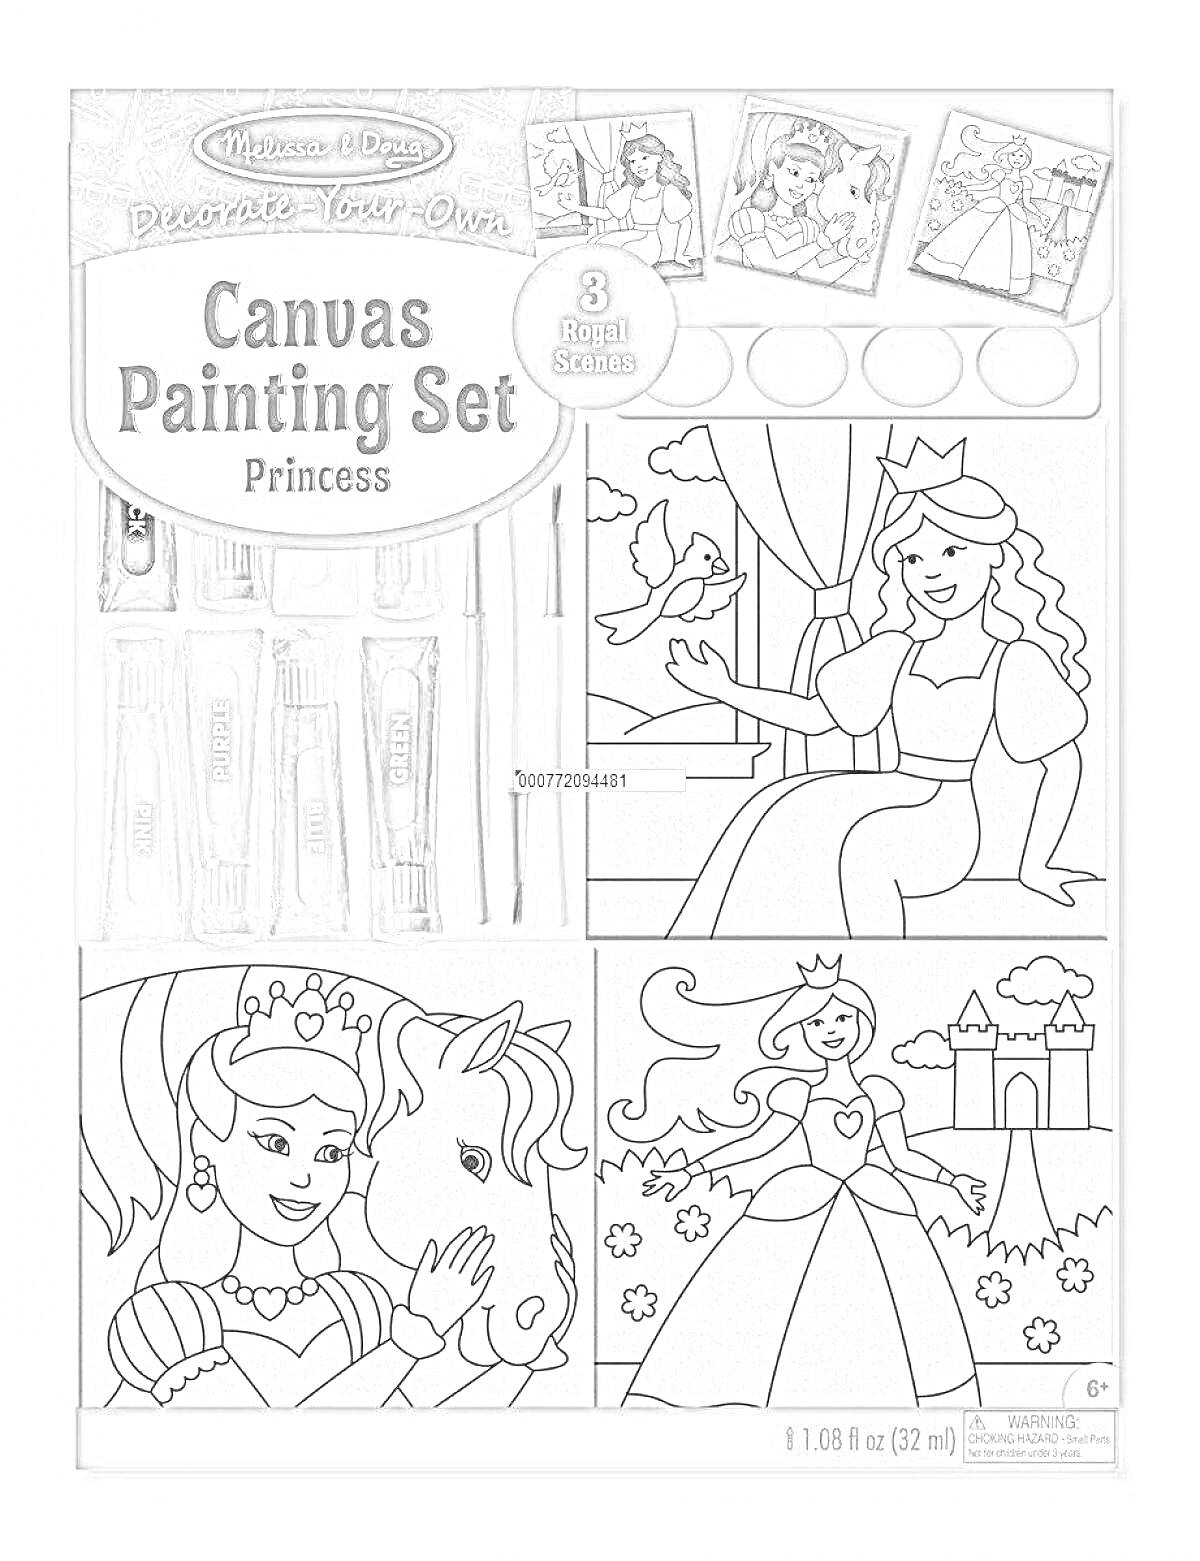 Раскраска Canvas Painting Set Princess, 3 Royal Scenes, includes paint, brush, and outline images of princesses in various settings including a forest, with a unicorn, and in front of a castle